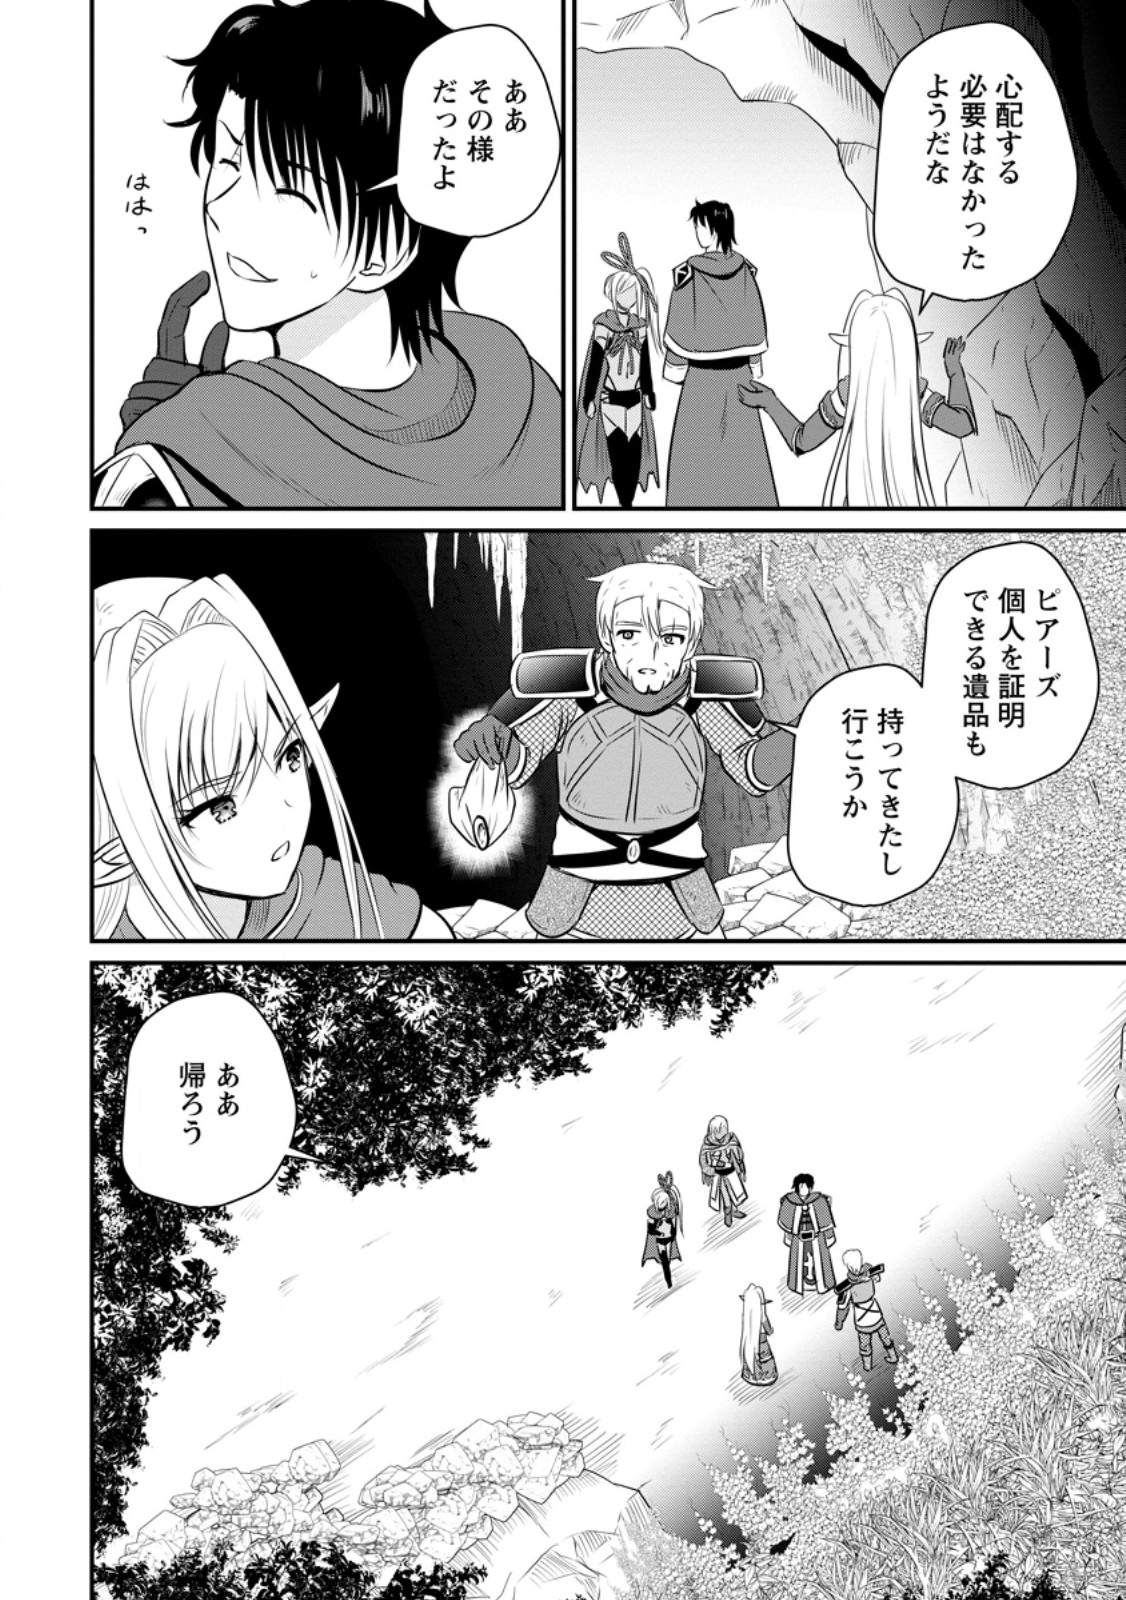 The Frontier Life of The Low-Class Ossan Healer And The Lovery Girl - Chapter 48.3 - Page 10